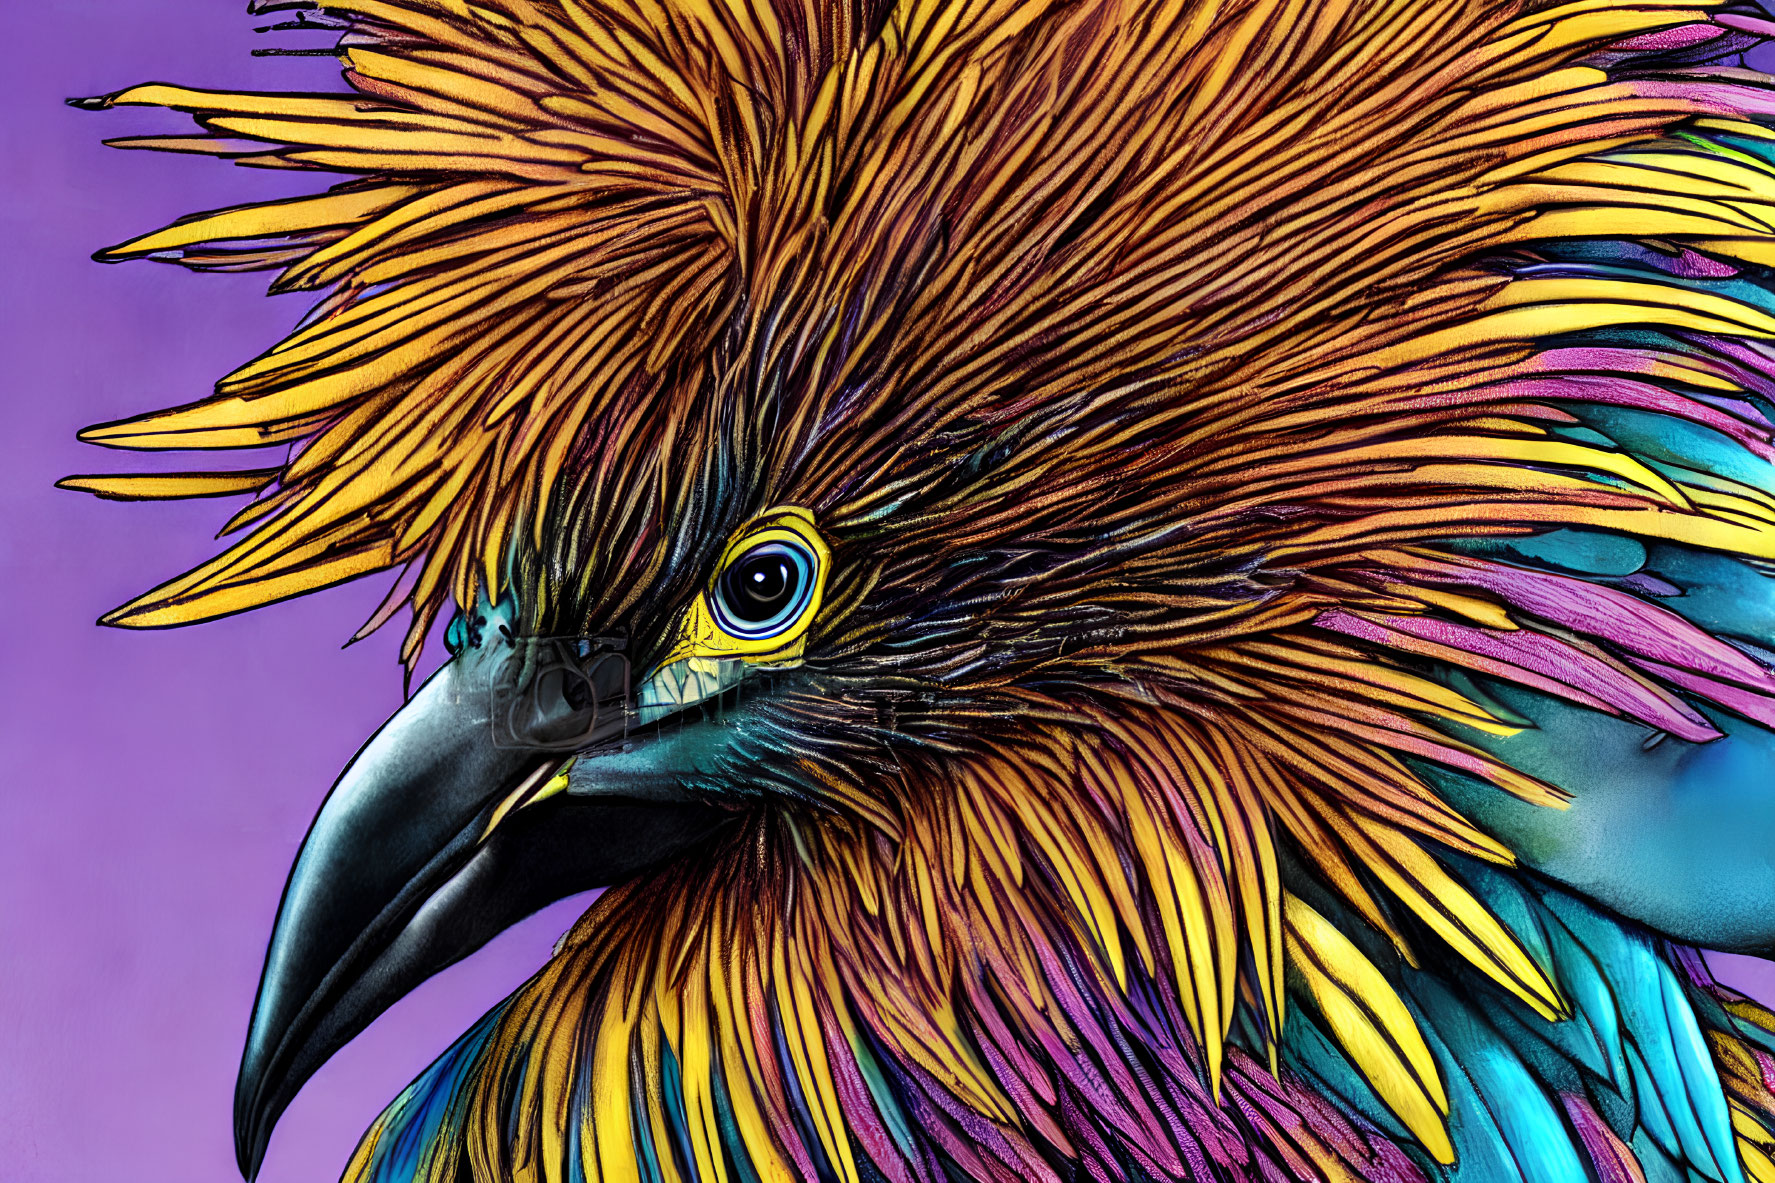 Colorful Bird Artwork in Yellow and Purple Tones on Dual-Toned Background